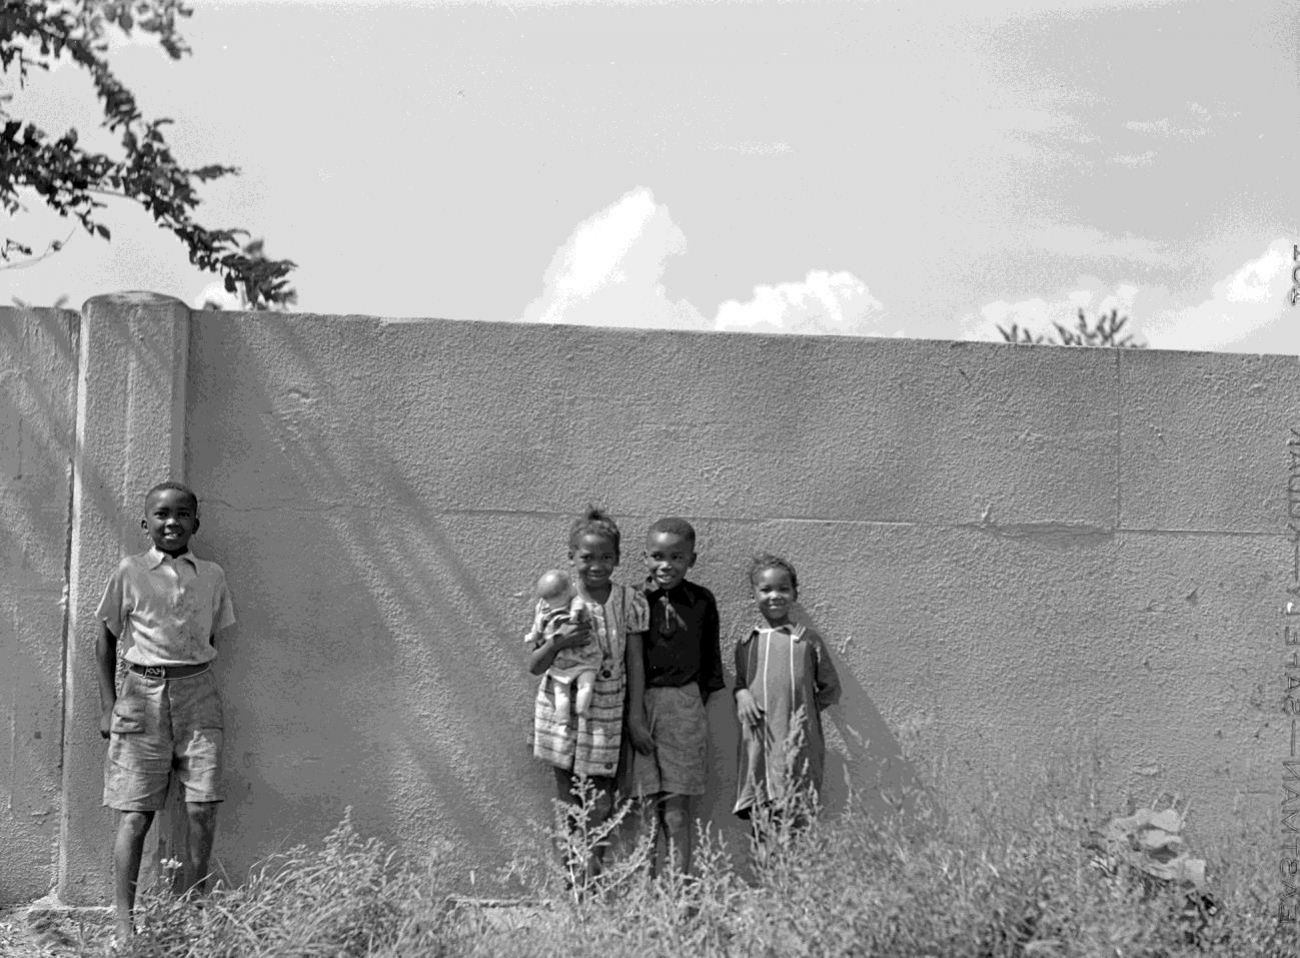 Children stand in front of the Birwood Wall in August 1941